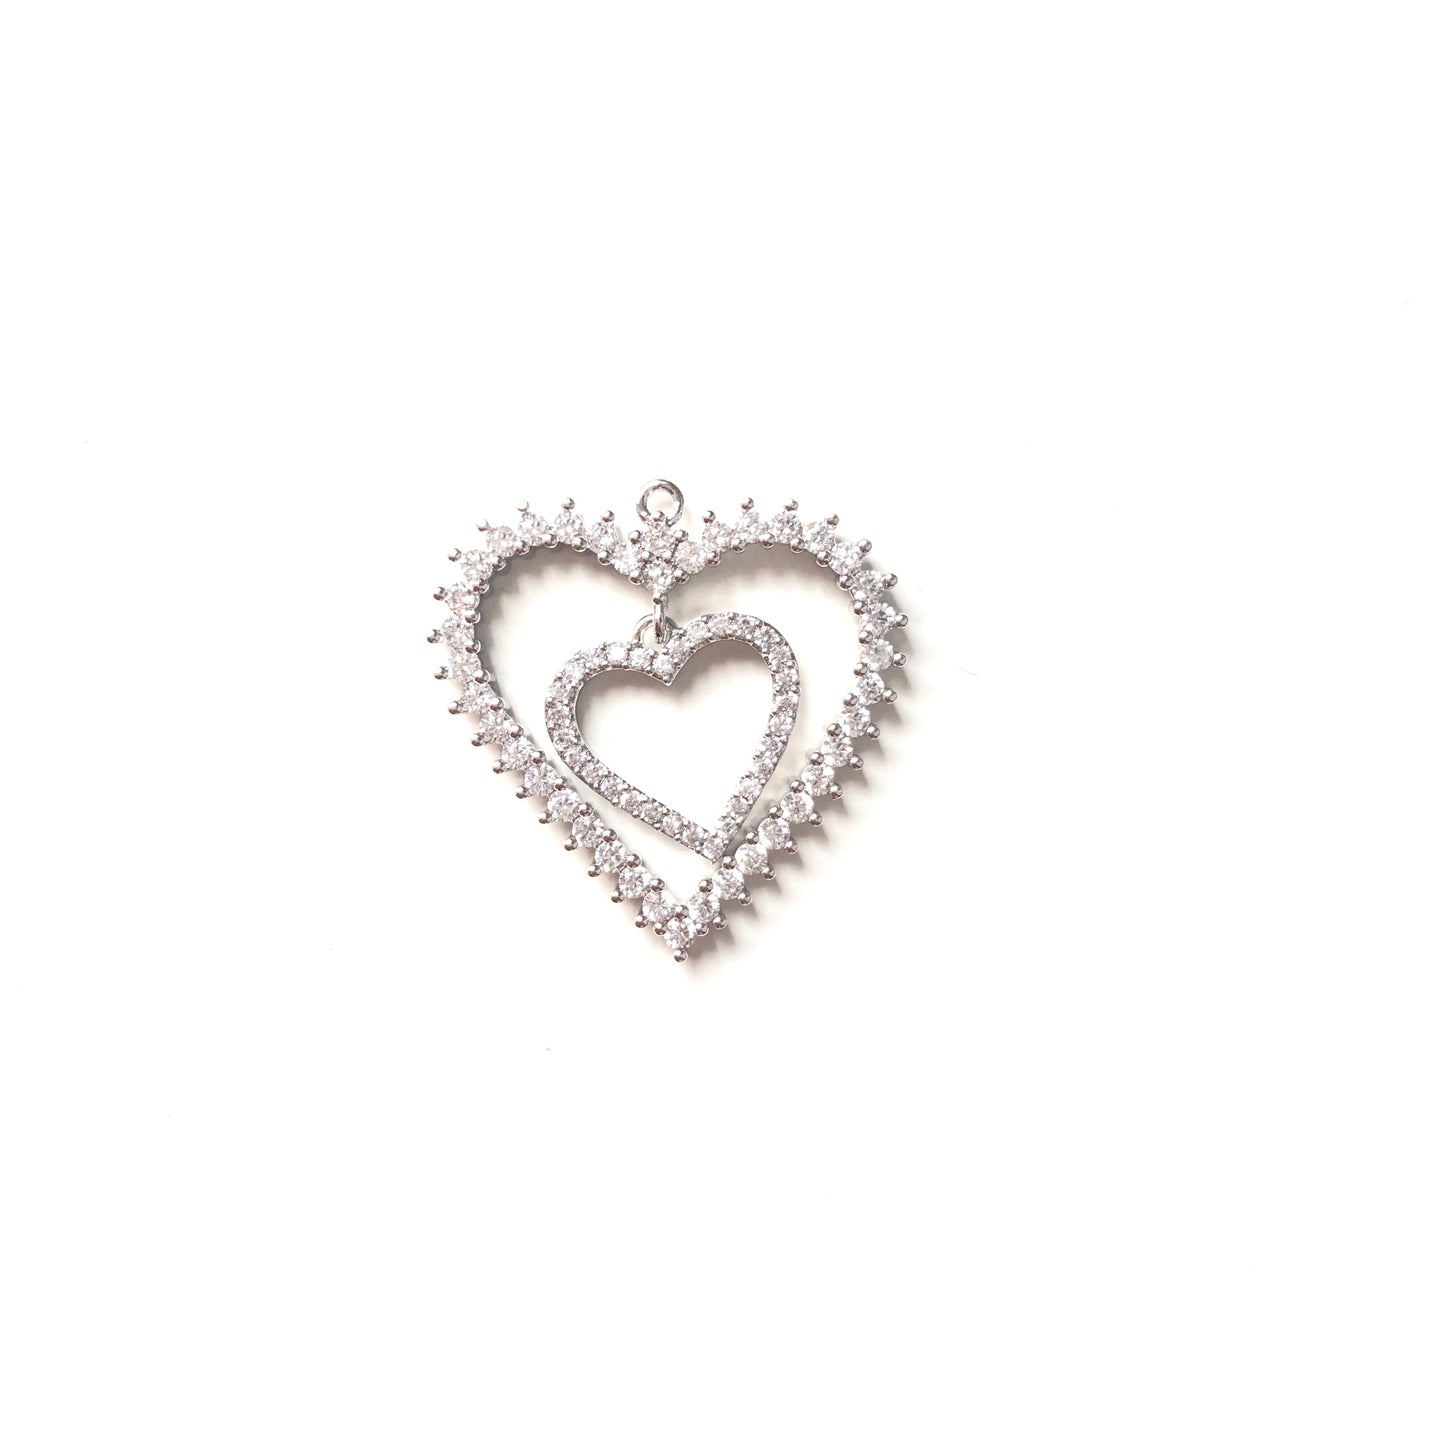 10pcs/lot 27*26.5mm CZ Paved Double Heart Charms Silver CZ Paved Charms Hearts On Sale Charms Beads Beyond